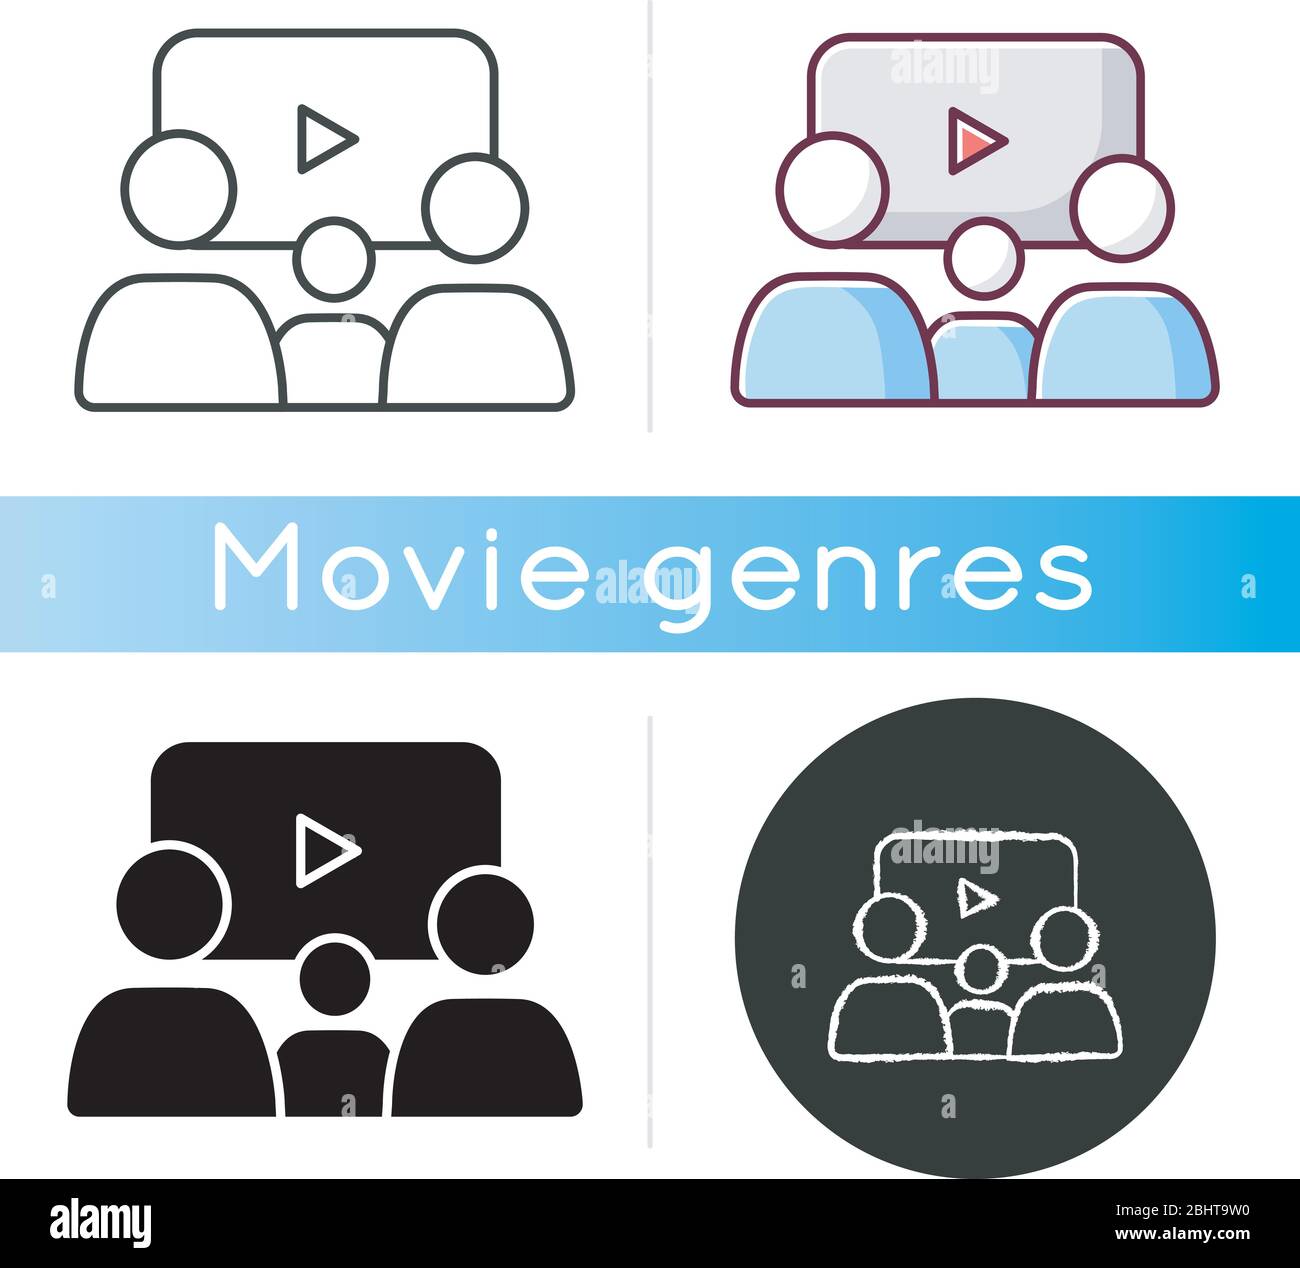 Family picture icon. Linear black and RGB color styles. Filmmaking style, cinema genre. Family friendly movies and TV series. Parents and kid watching Stock Vector